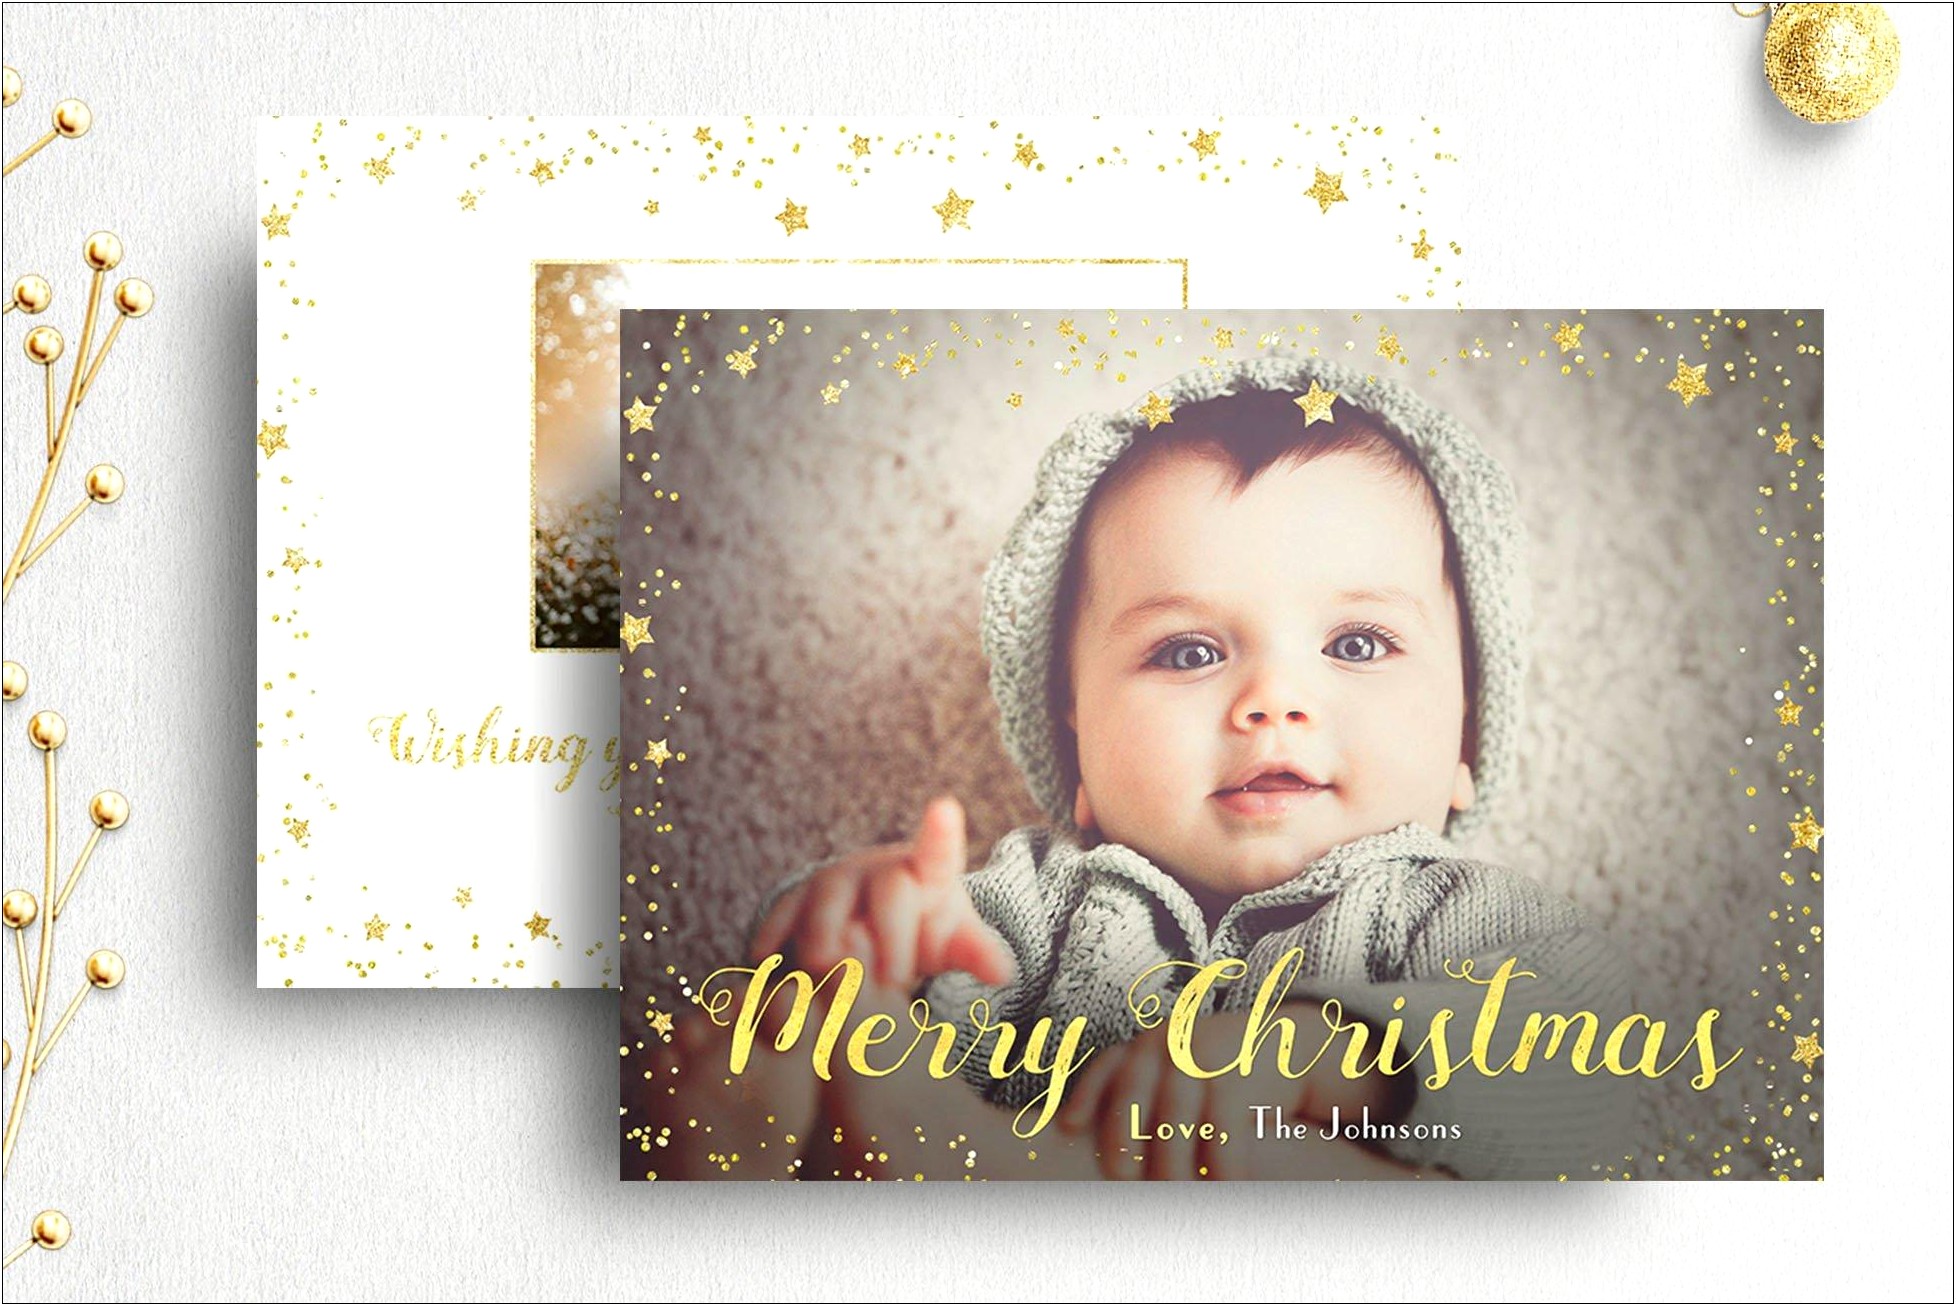 Free Photoshop Templates For Christmas Cards